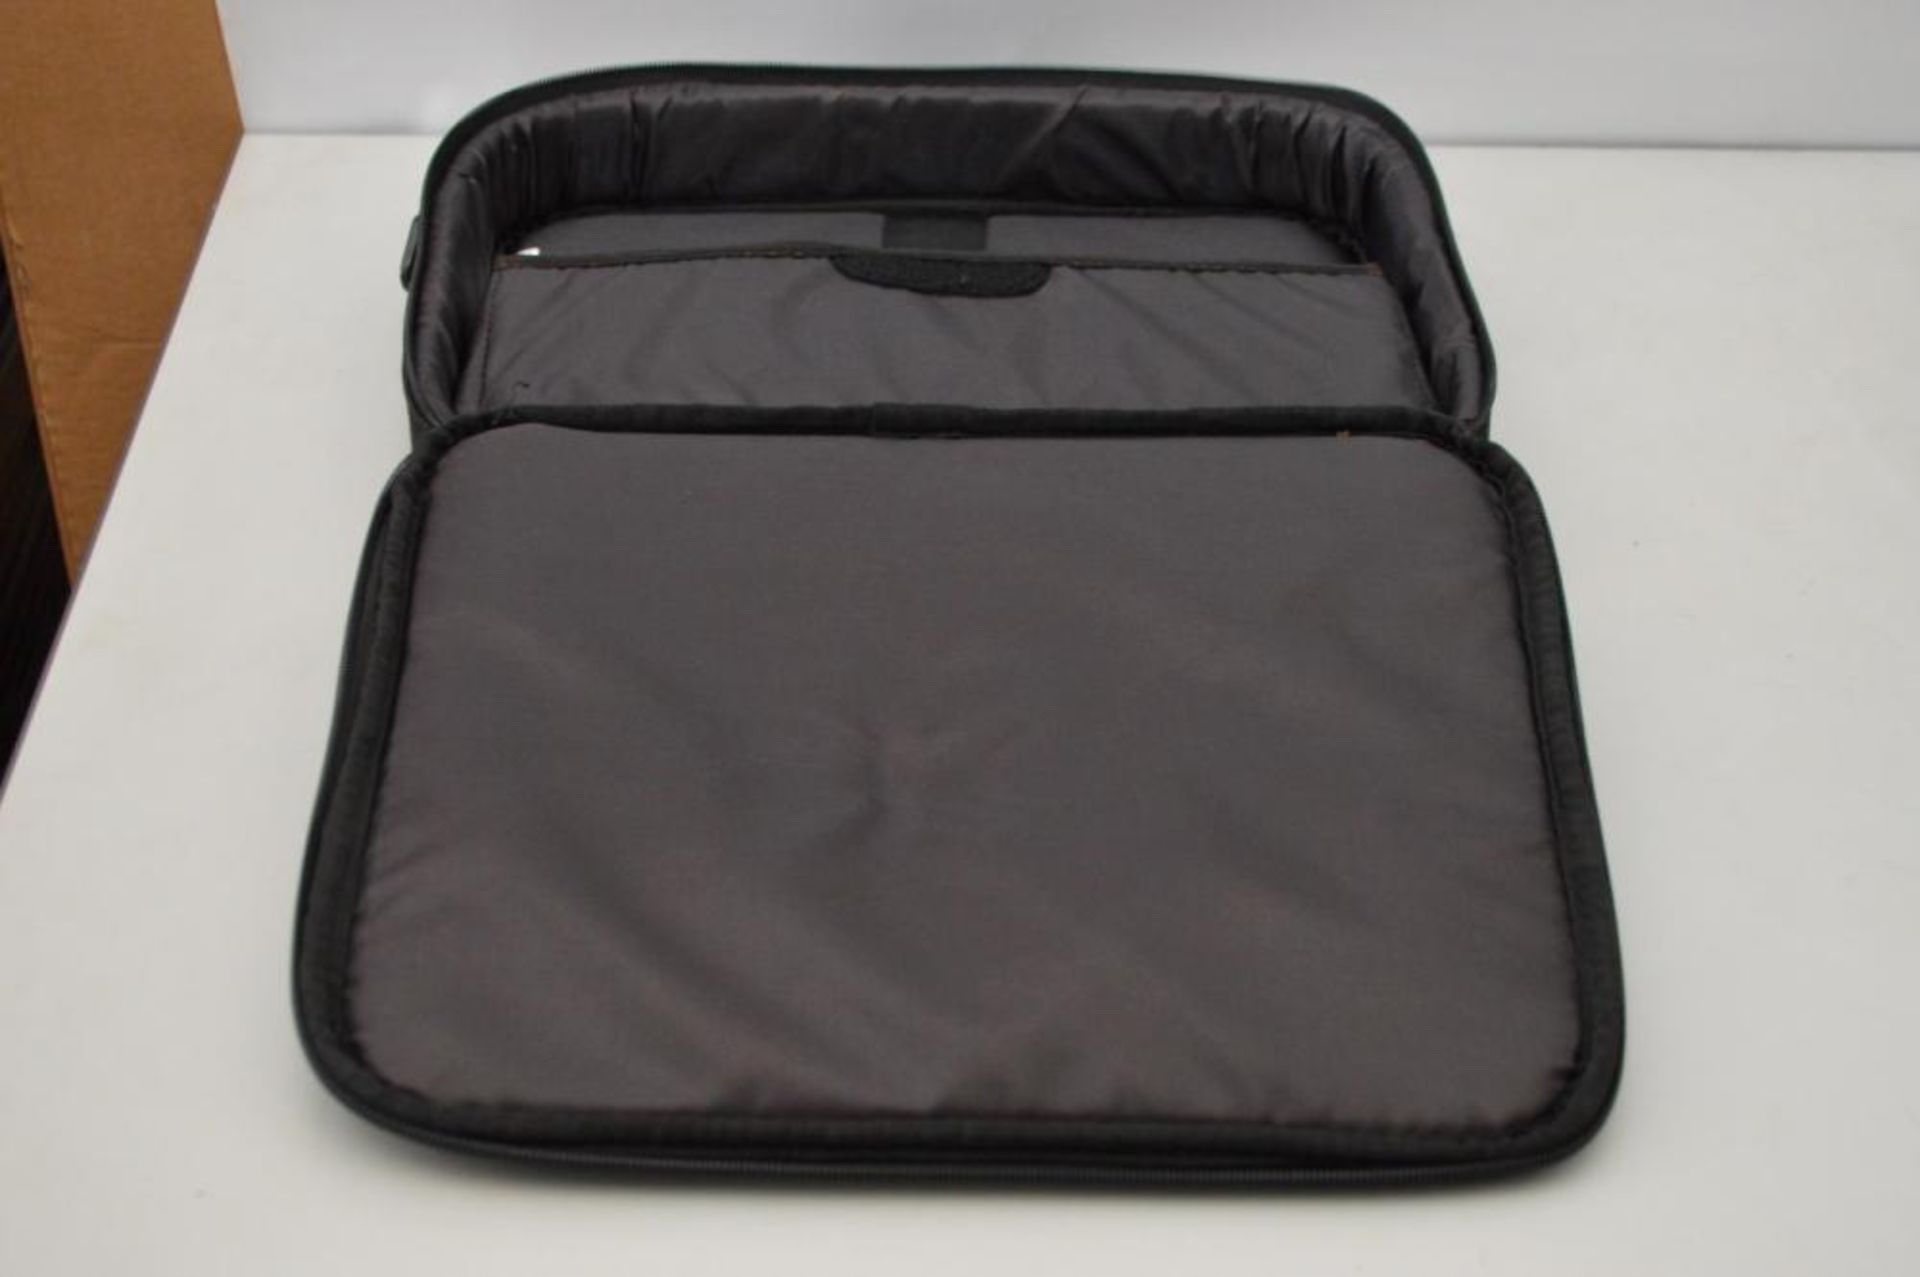 12 x Big Change Tablet Bags 16inchs - Ref TP394 - CL394 - Location: Altrincham WA14 - UP N A - Image 3 of 5